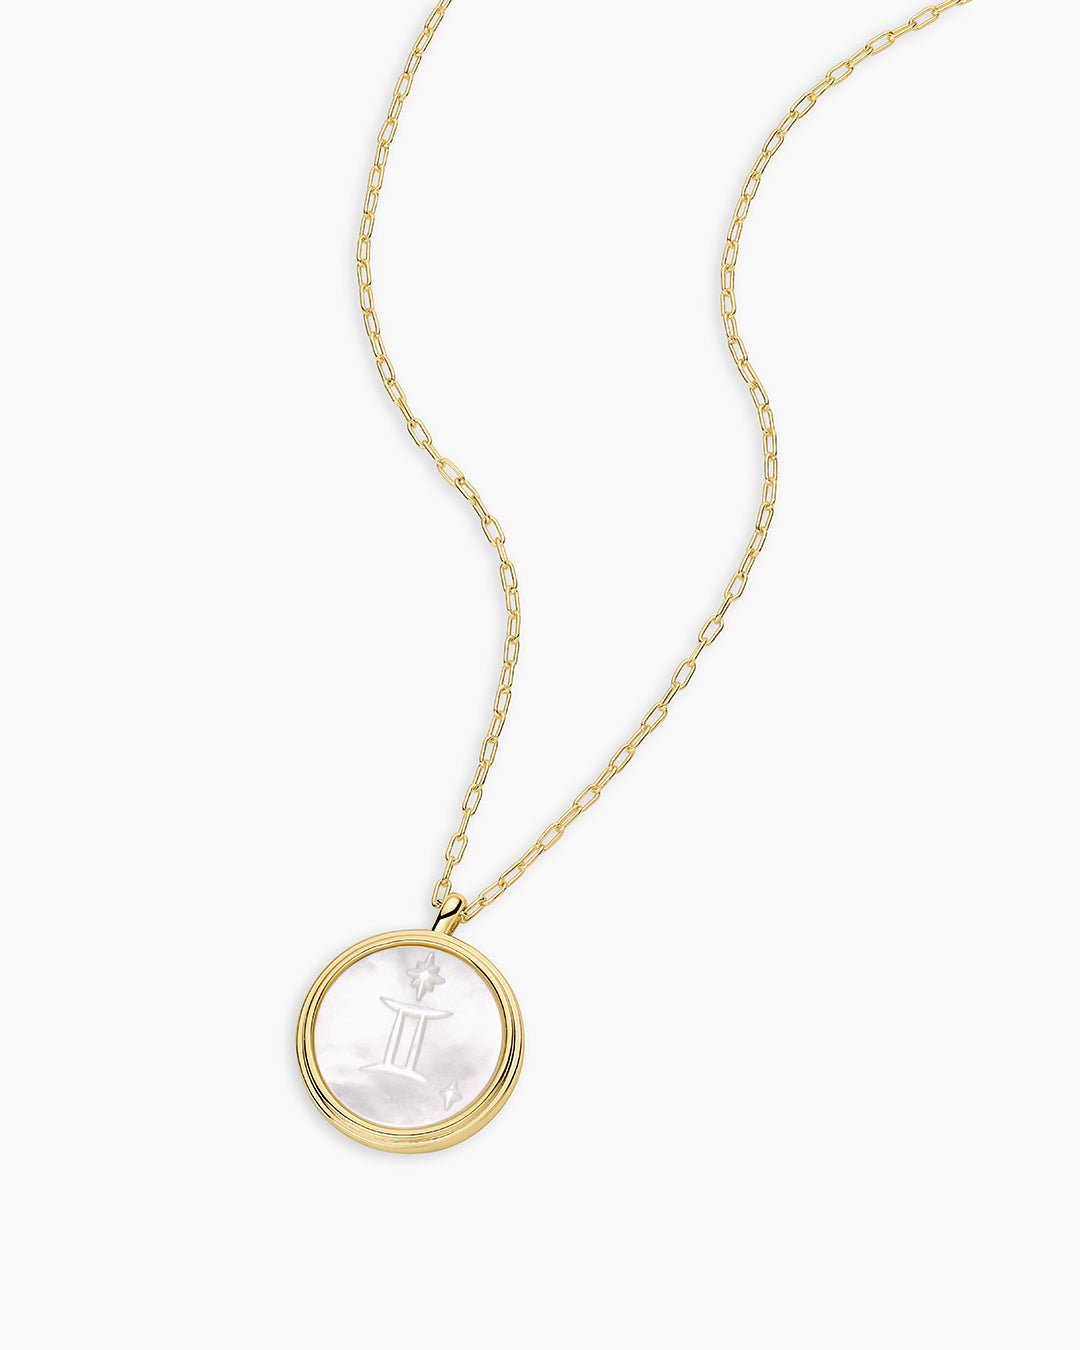 Zodiac Necklace - Scorpio, Astrology Coin Necklace, Scorpio Necklace || option::Gold Plated, Gemini